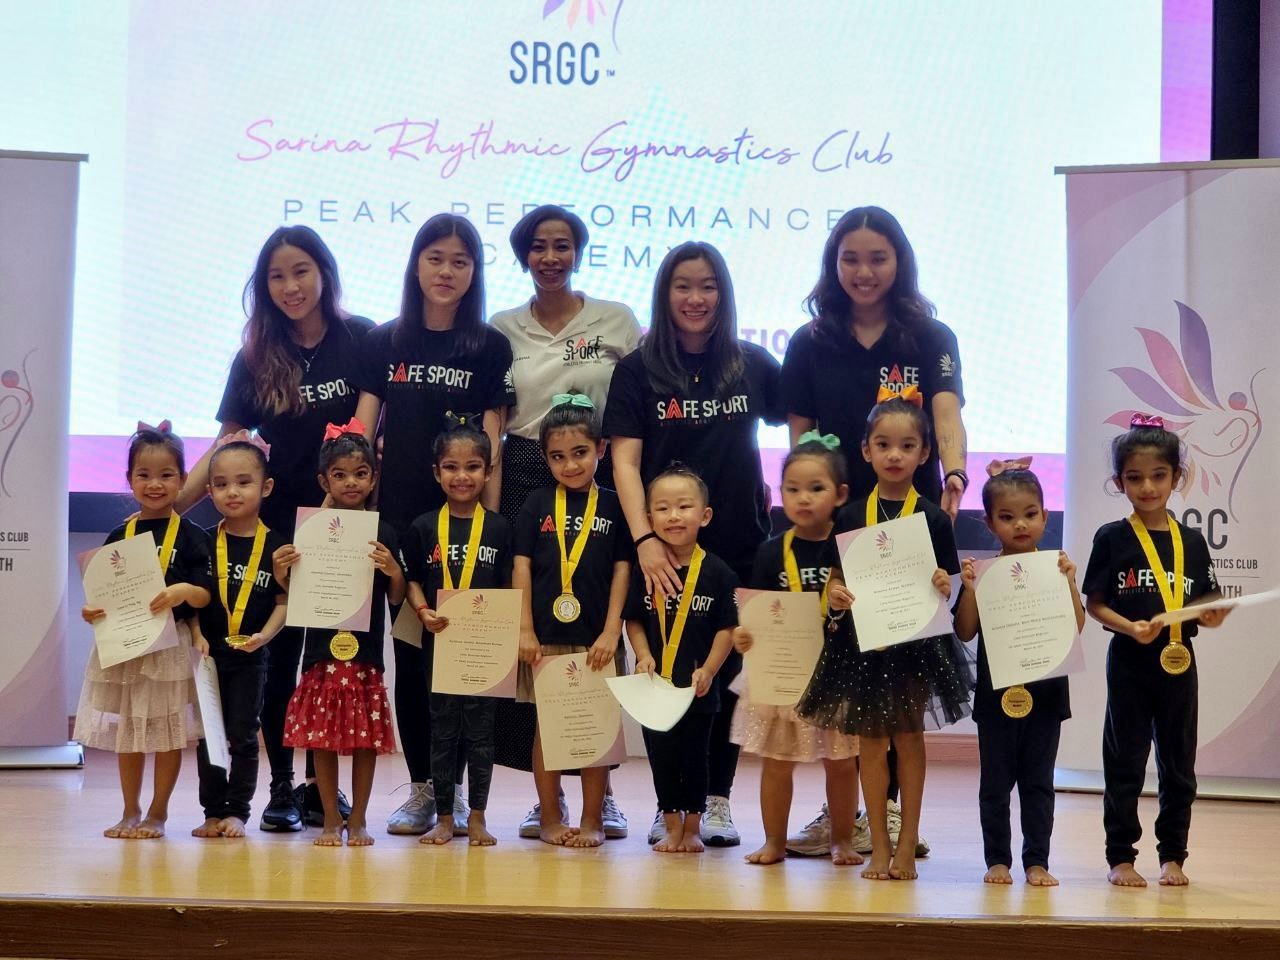 SRGC launches Piala Puteri Championship to empower young girls